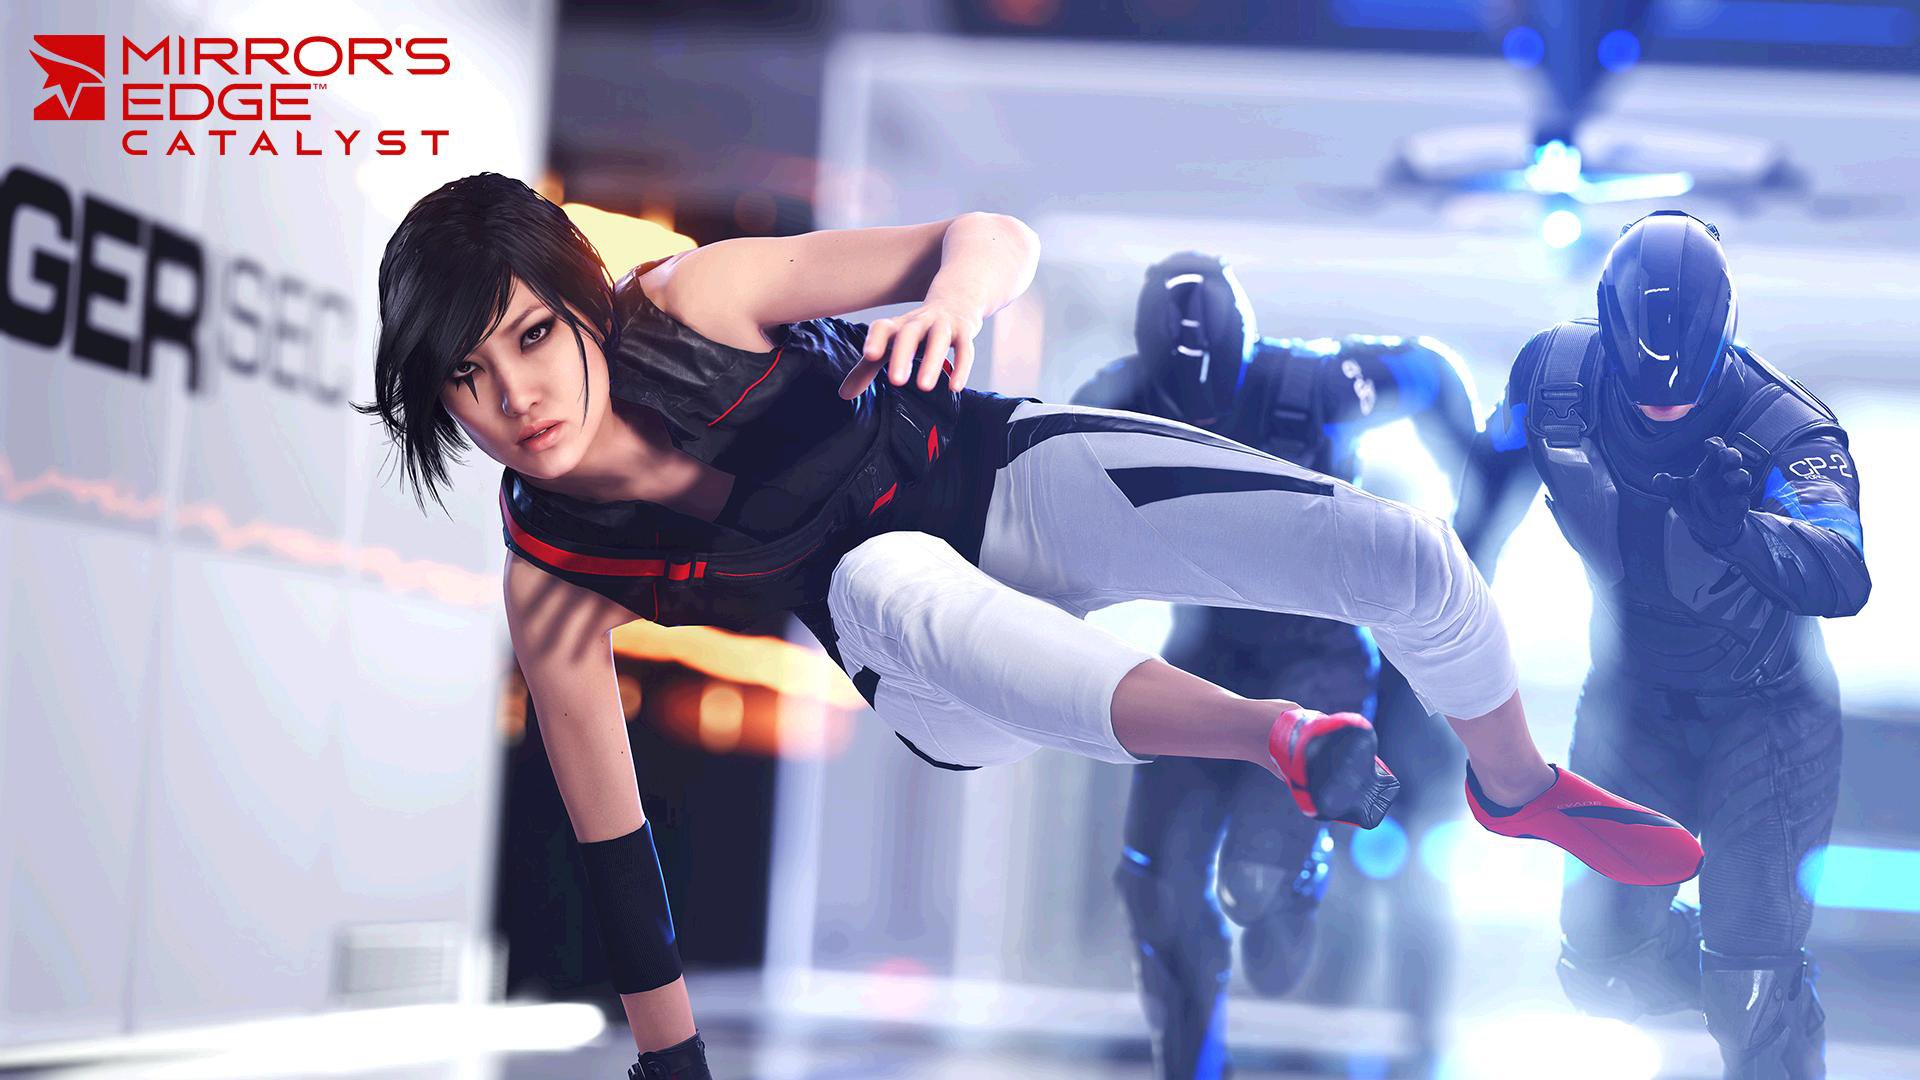 Mirrors Edge Catalyst Hd Wallpaper Background Image 1920x1080